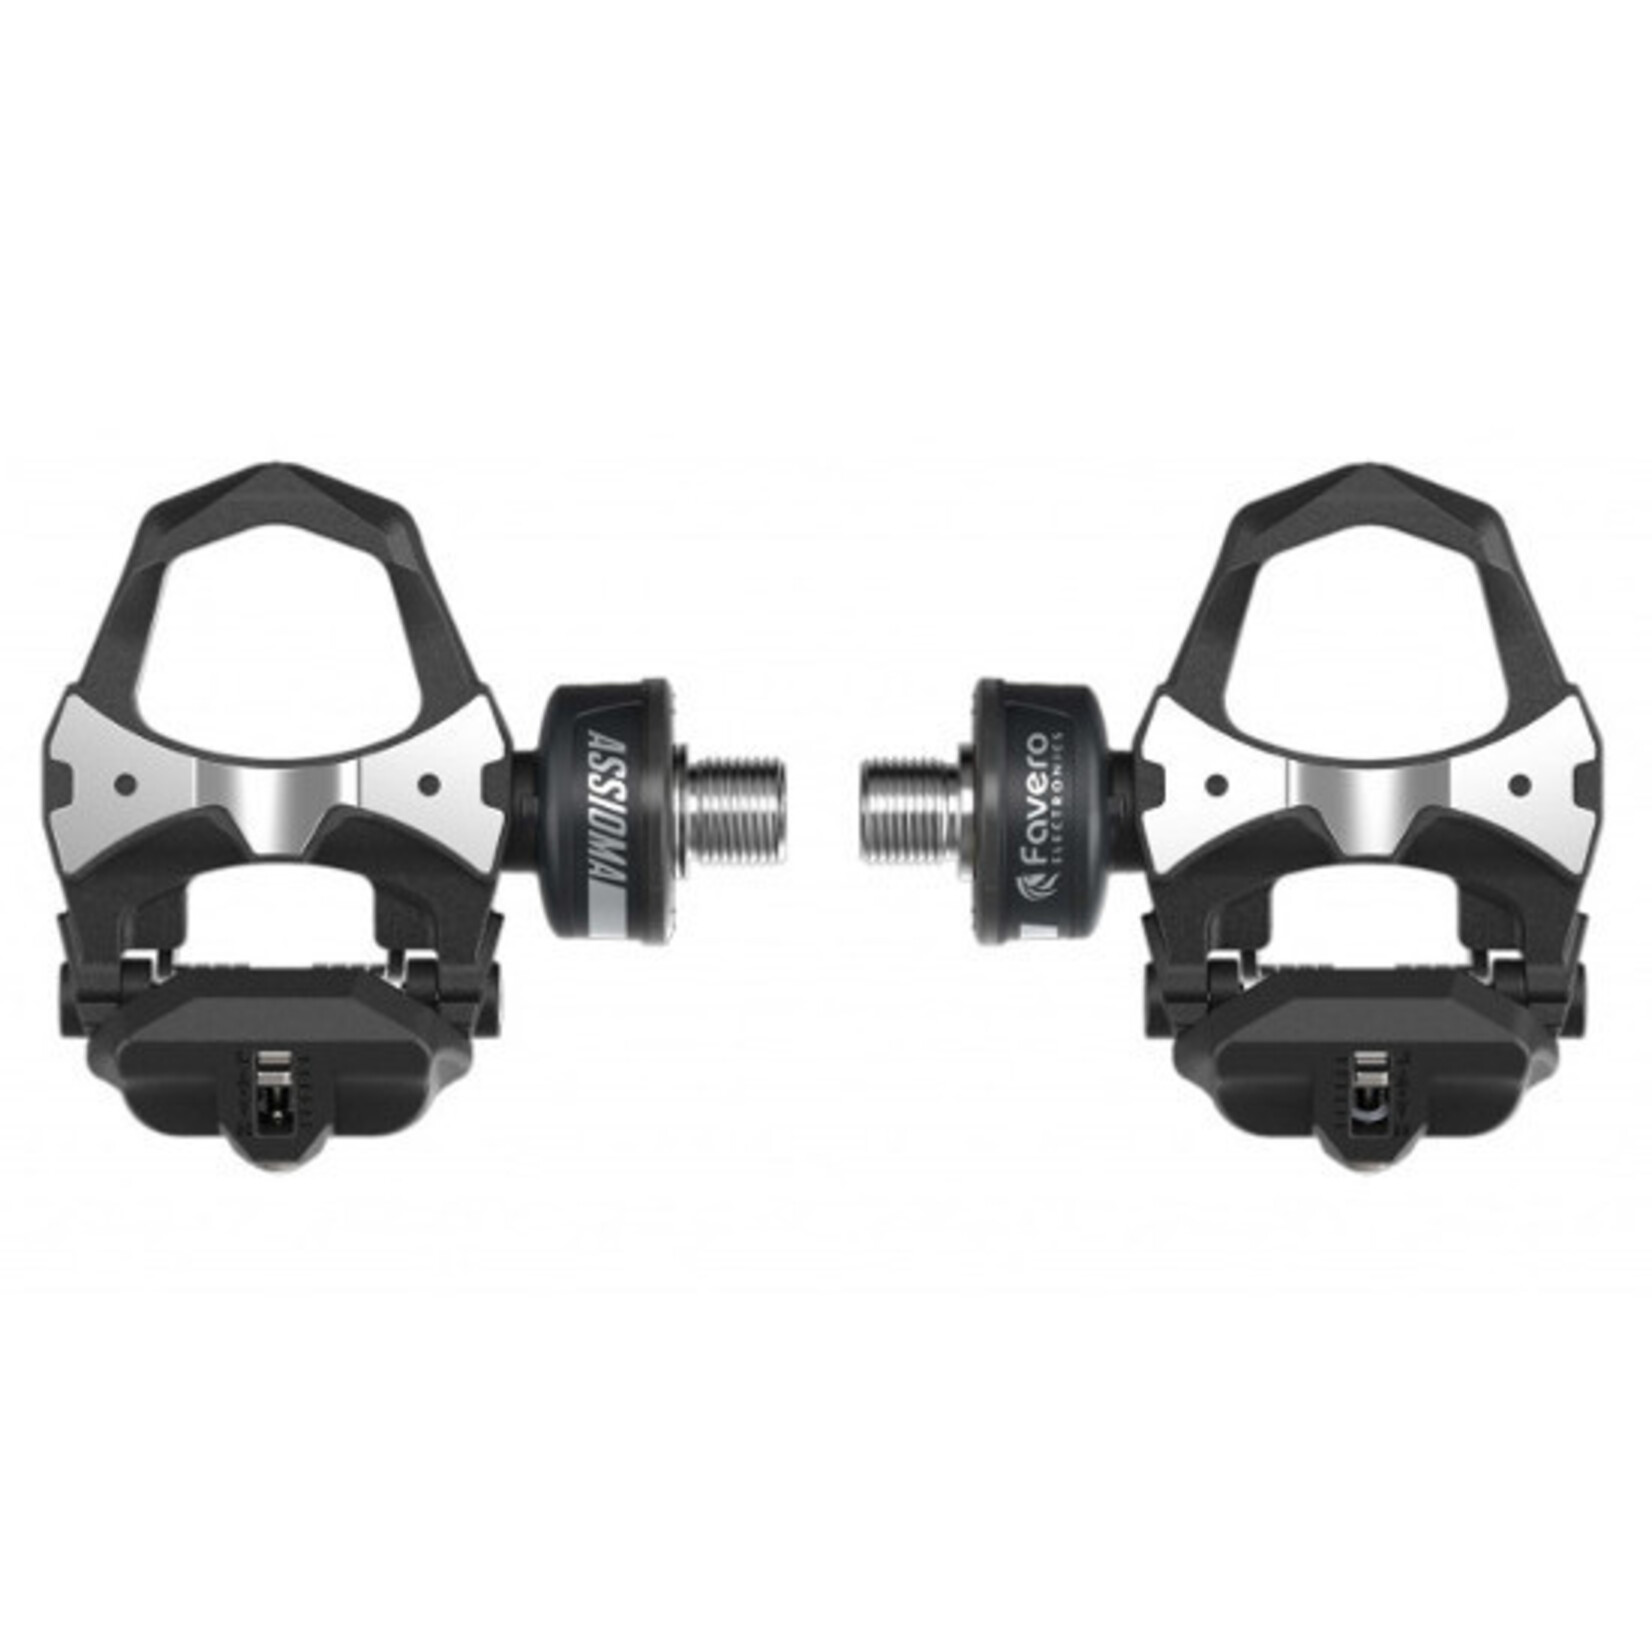 Favero Favero Assioma DUO Double Side Power Meter Pedals - ANT+ Power Cadence Torque